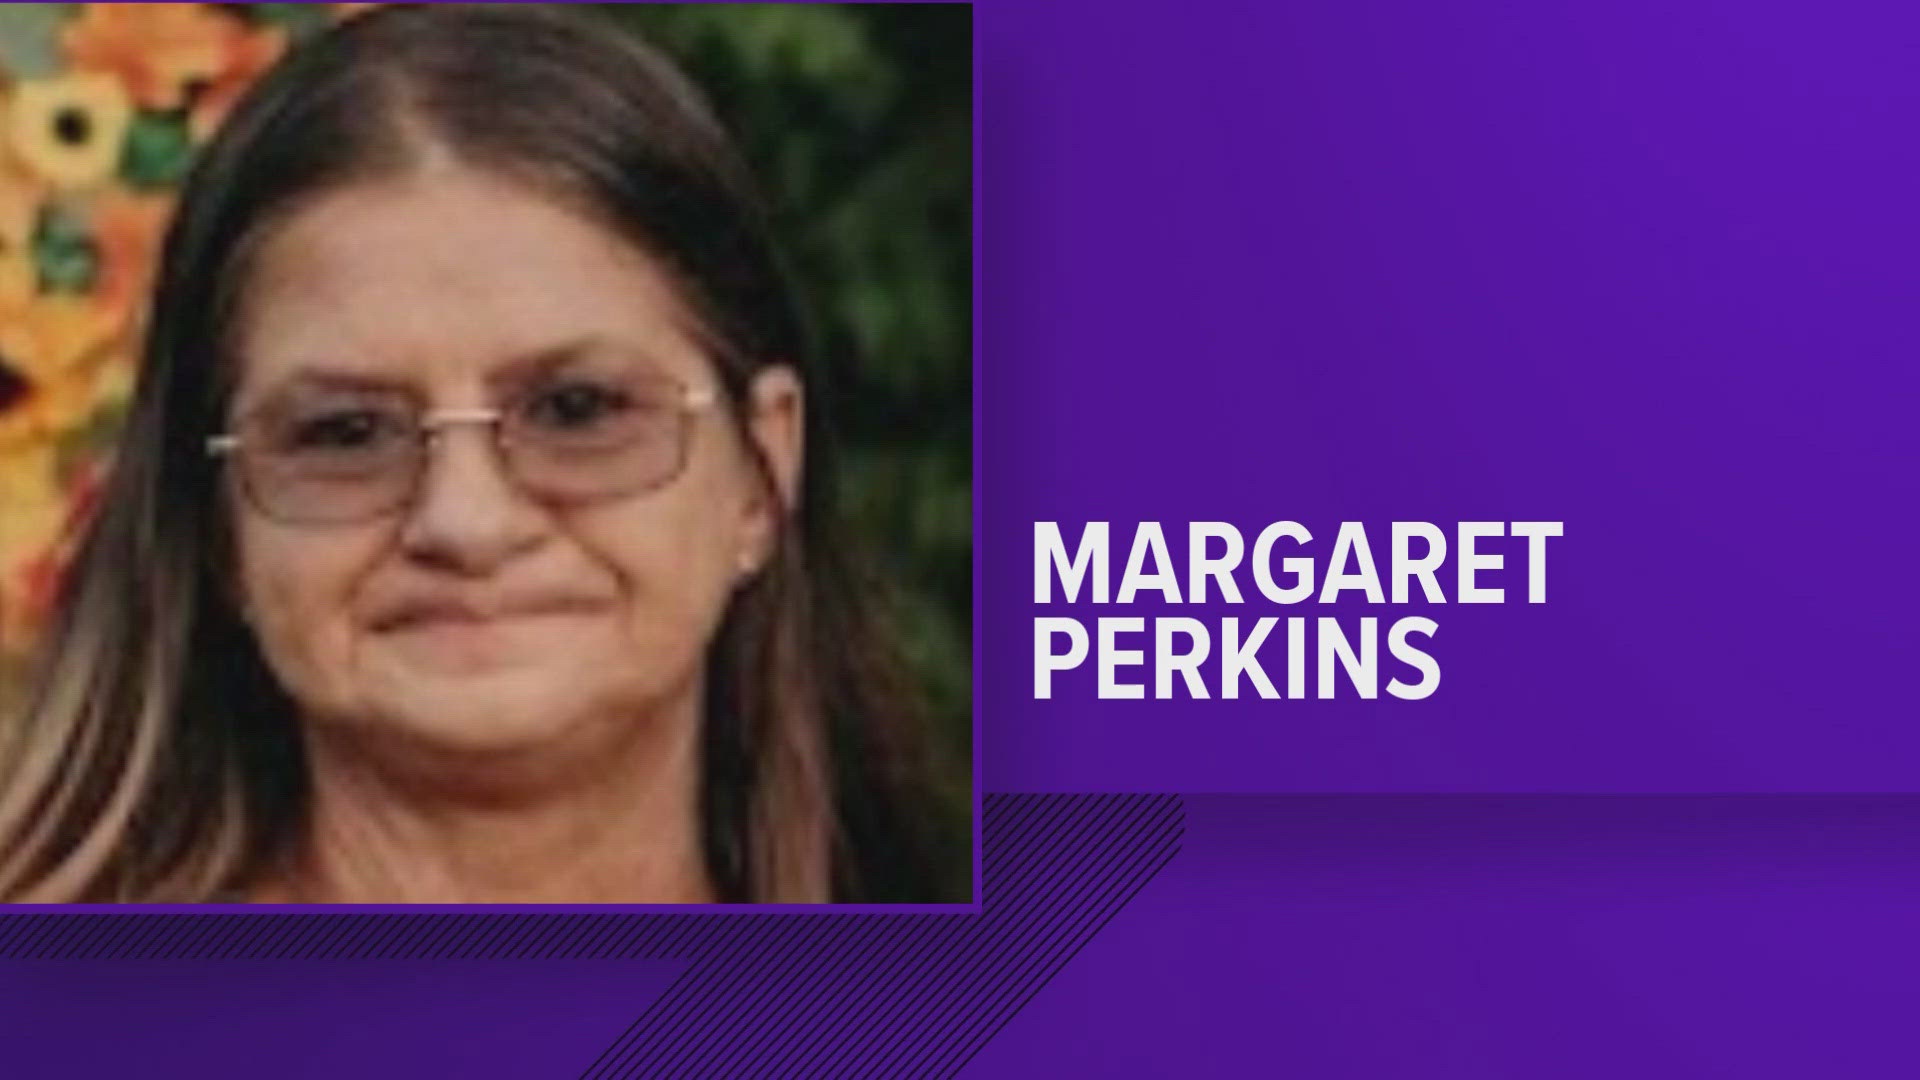 The Tennessee Bureau of Investigation said Margaret Perkins was last seen on May 6th.